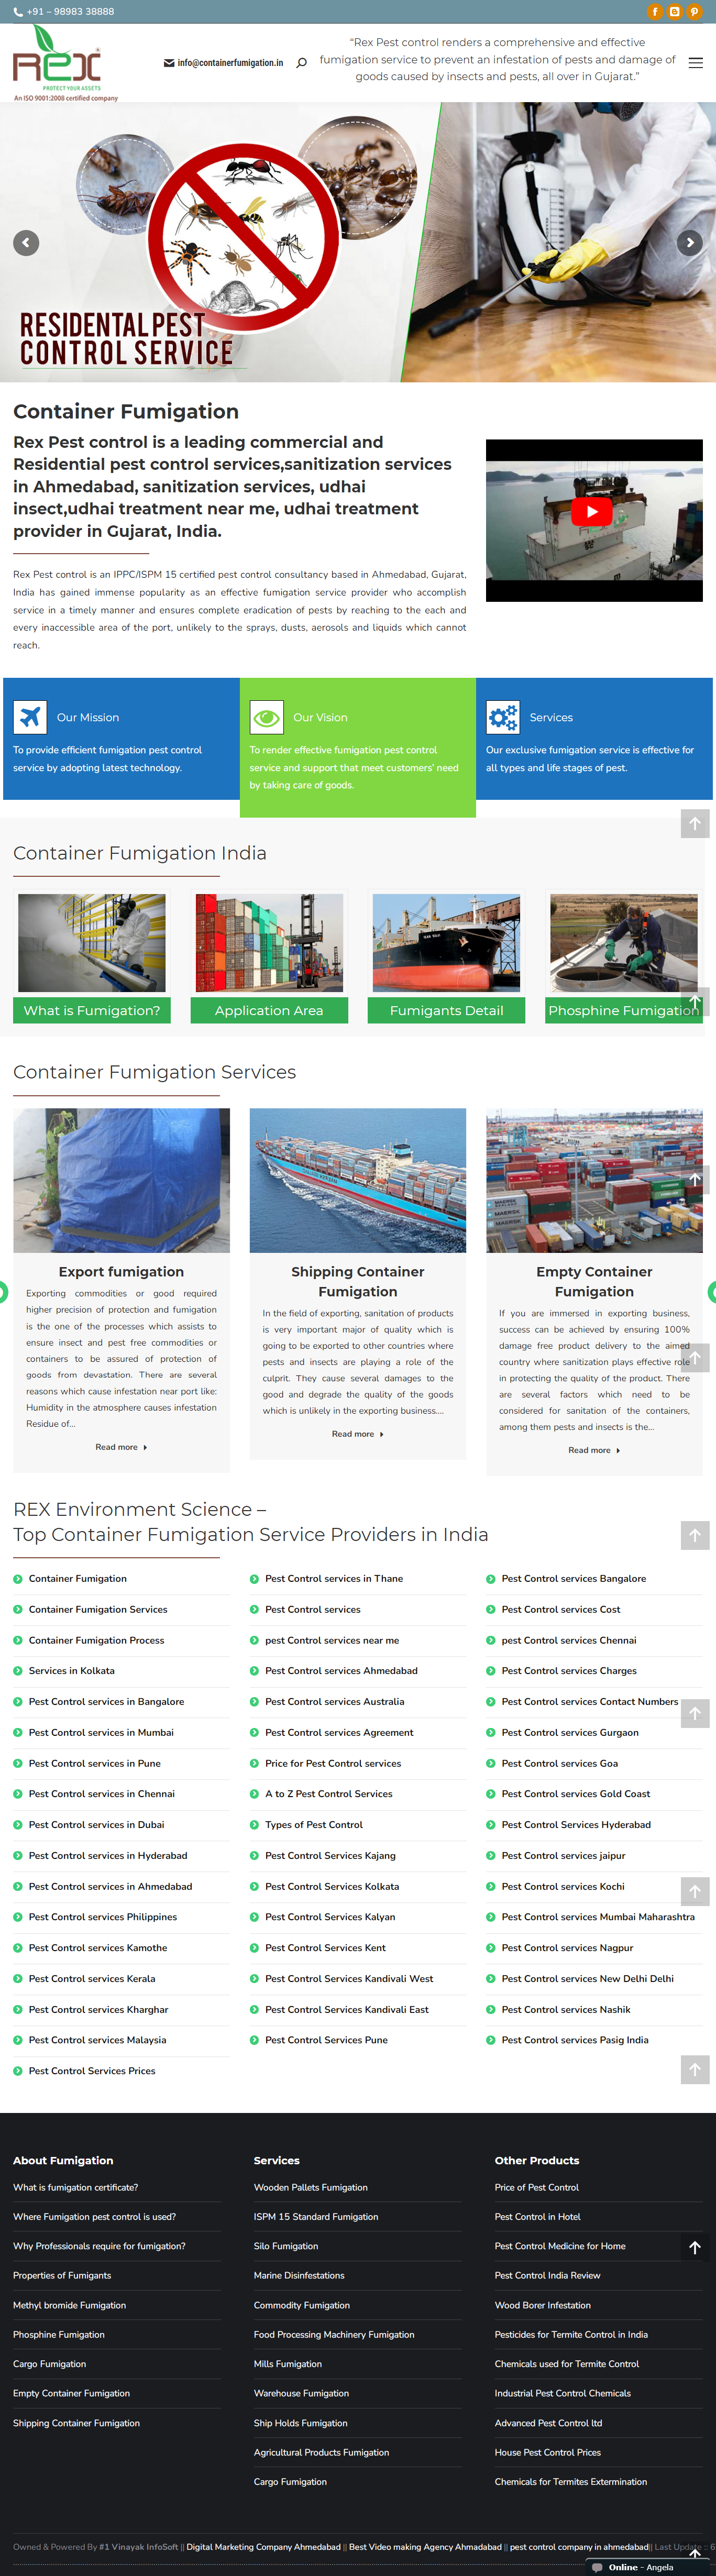 Container Fumigation